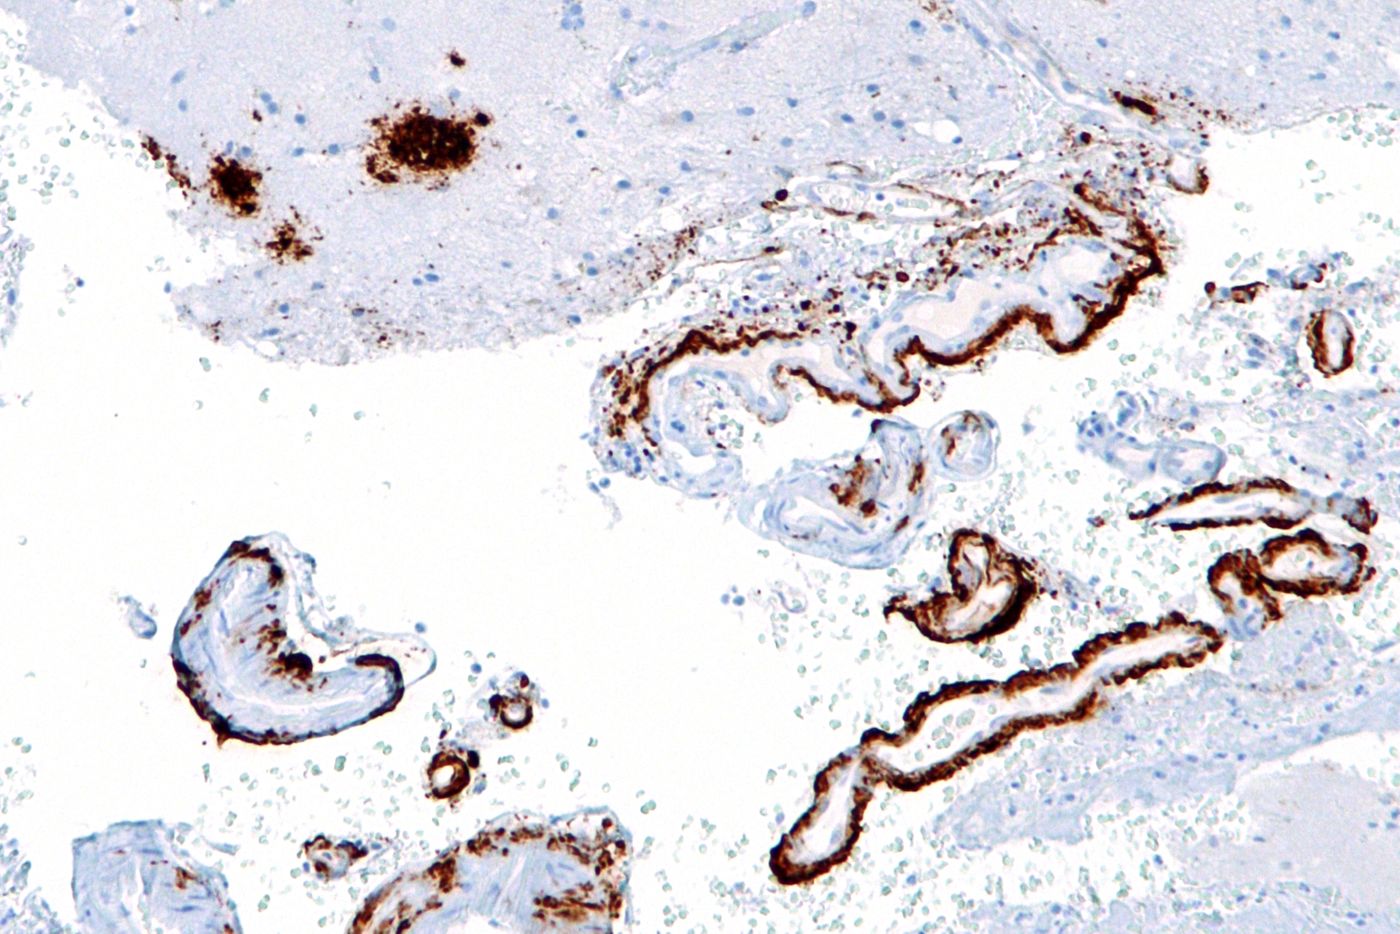 Beta-amyloid plaques